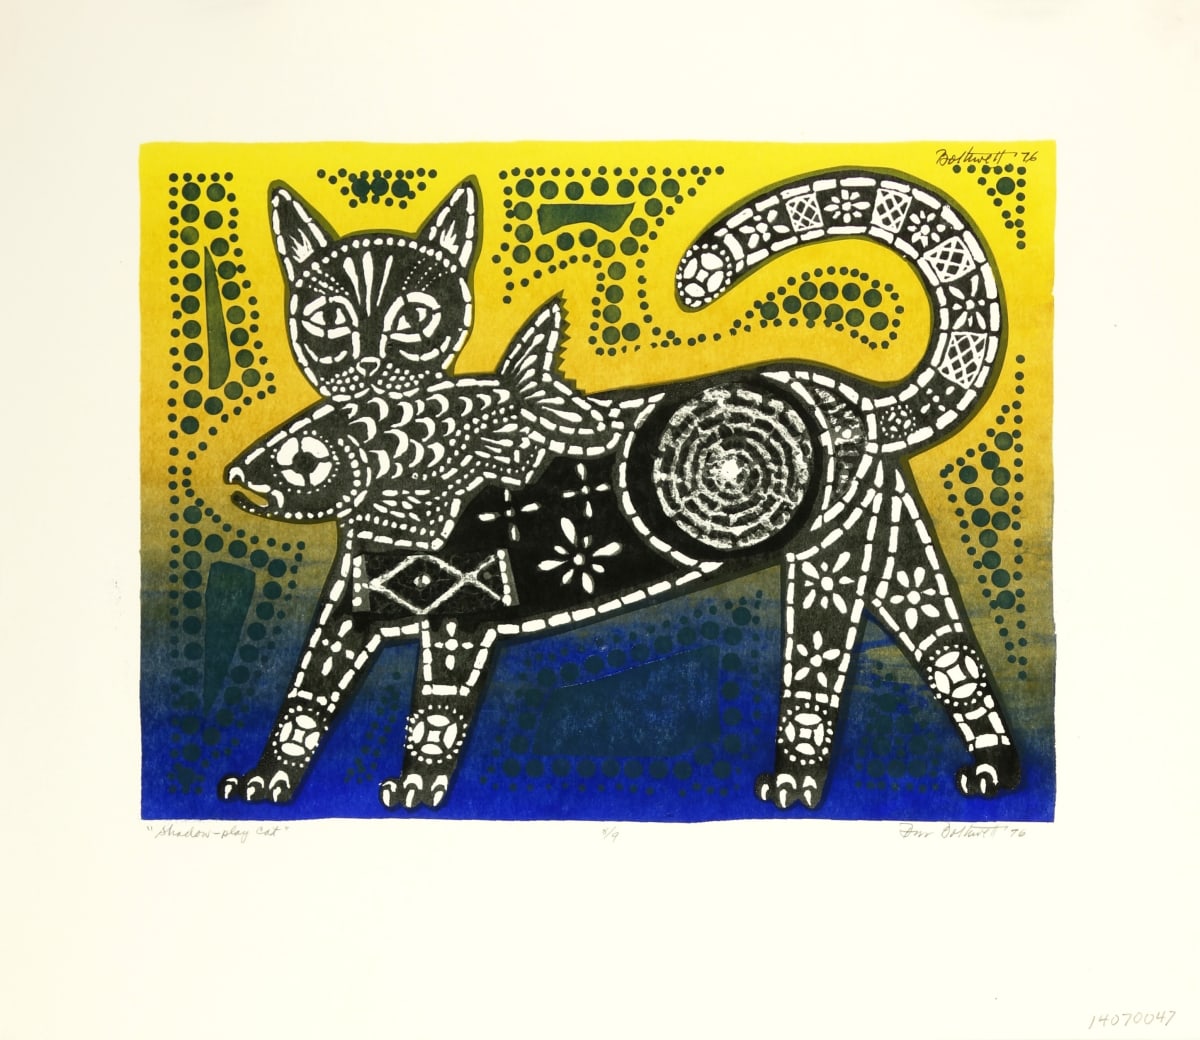 Shadow Play Cat  no. 8/9  (blue / yellow version) by Dorr Bothwell 